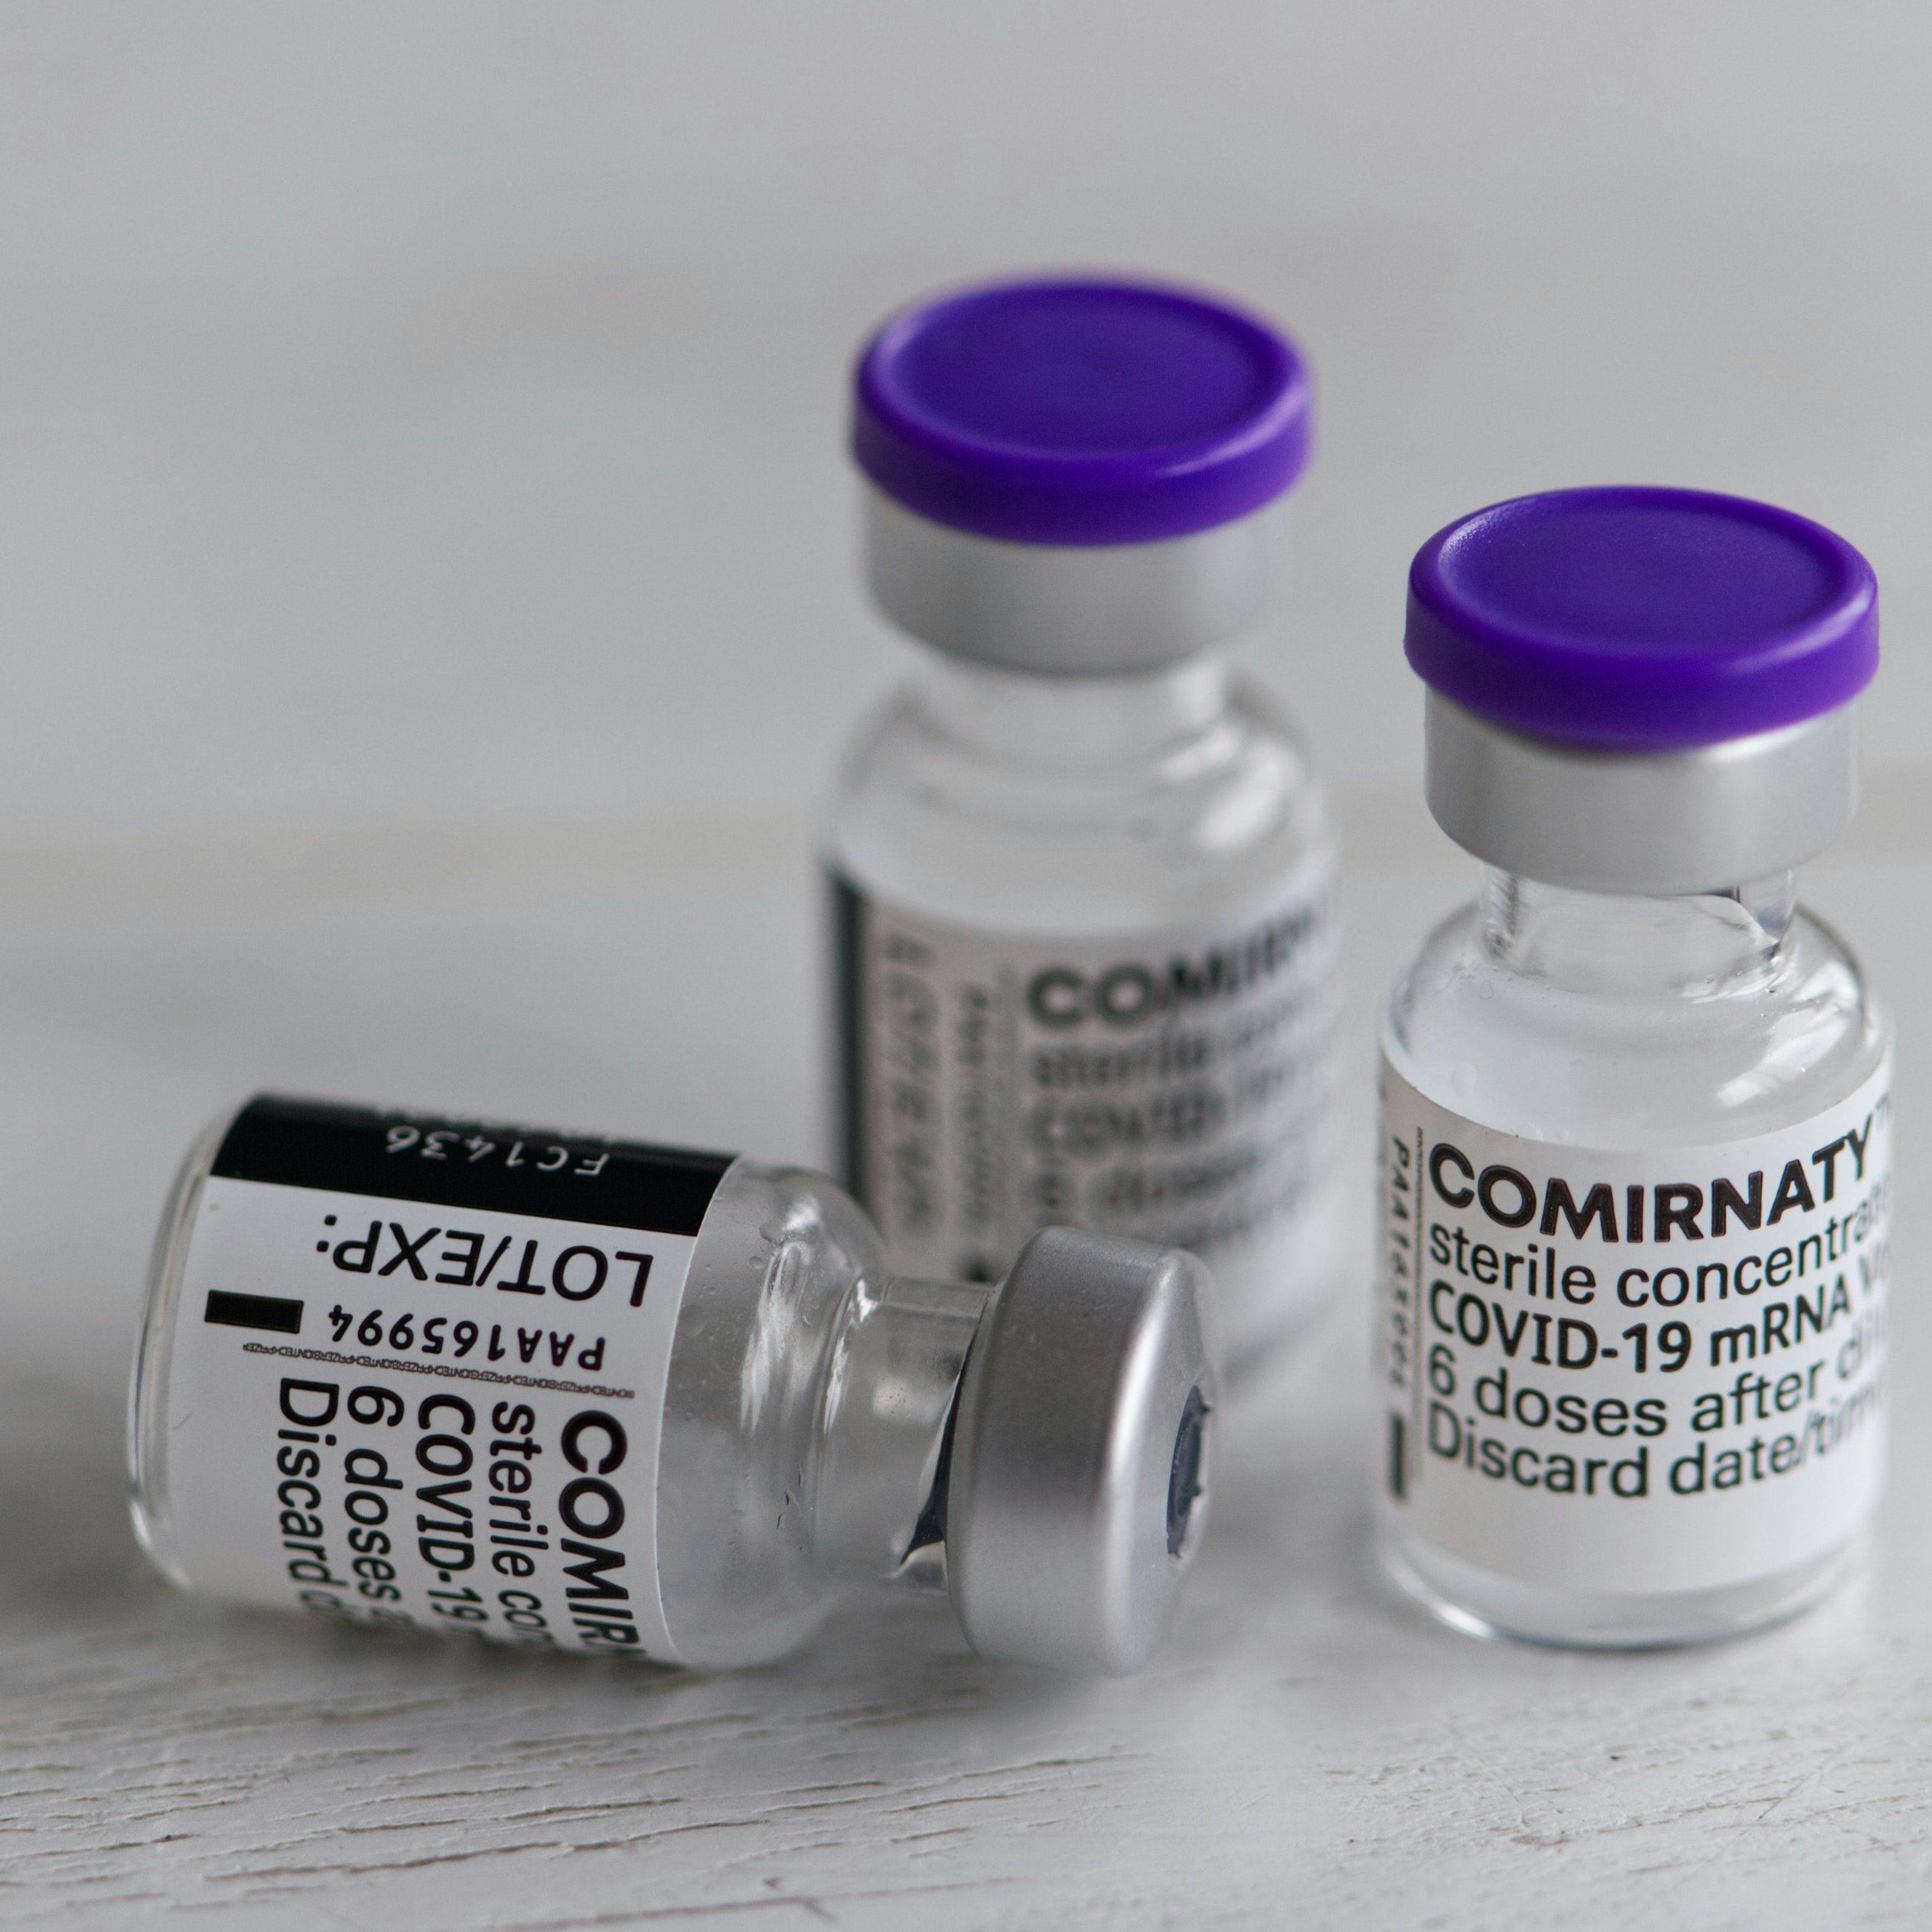 Single Dose of Pfizer-BioNTech COVID-19 Vaccine Linked to 82% Reduced Reinfection Risk